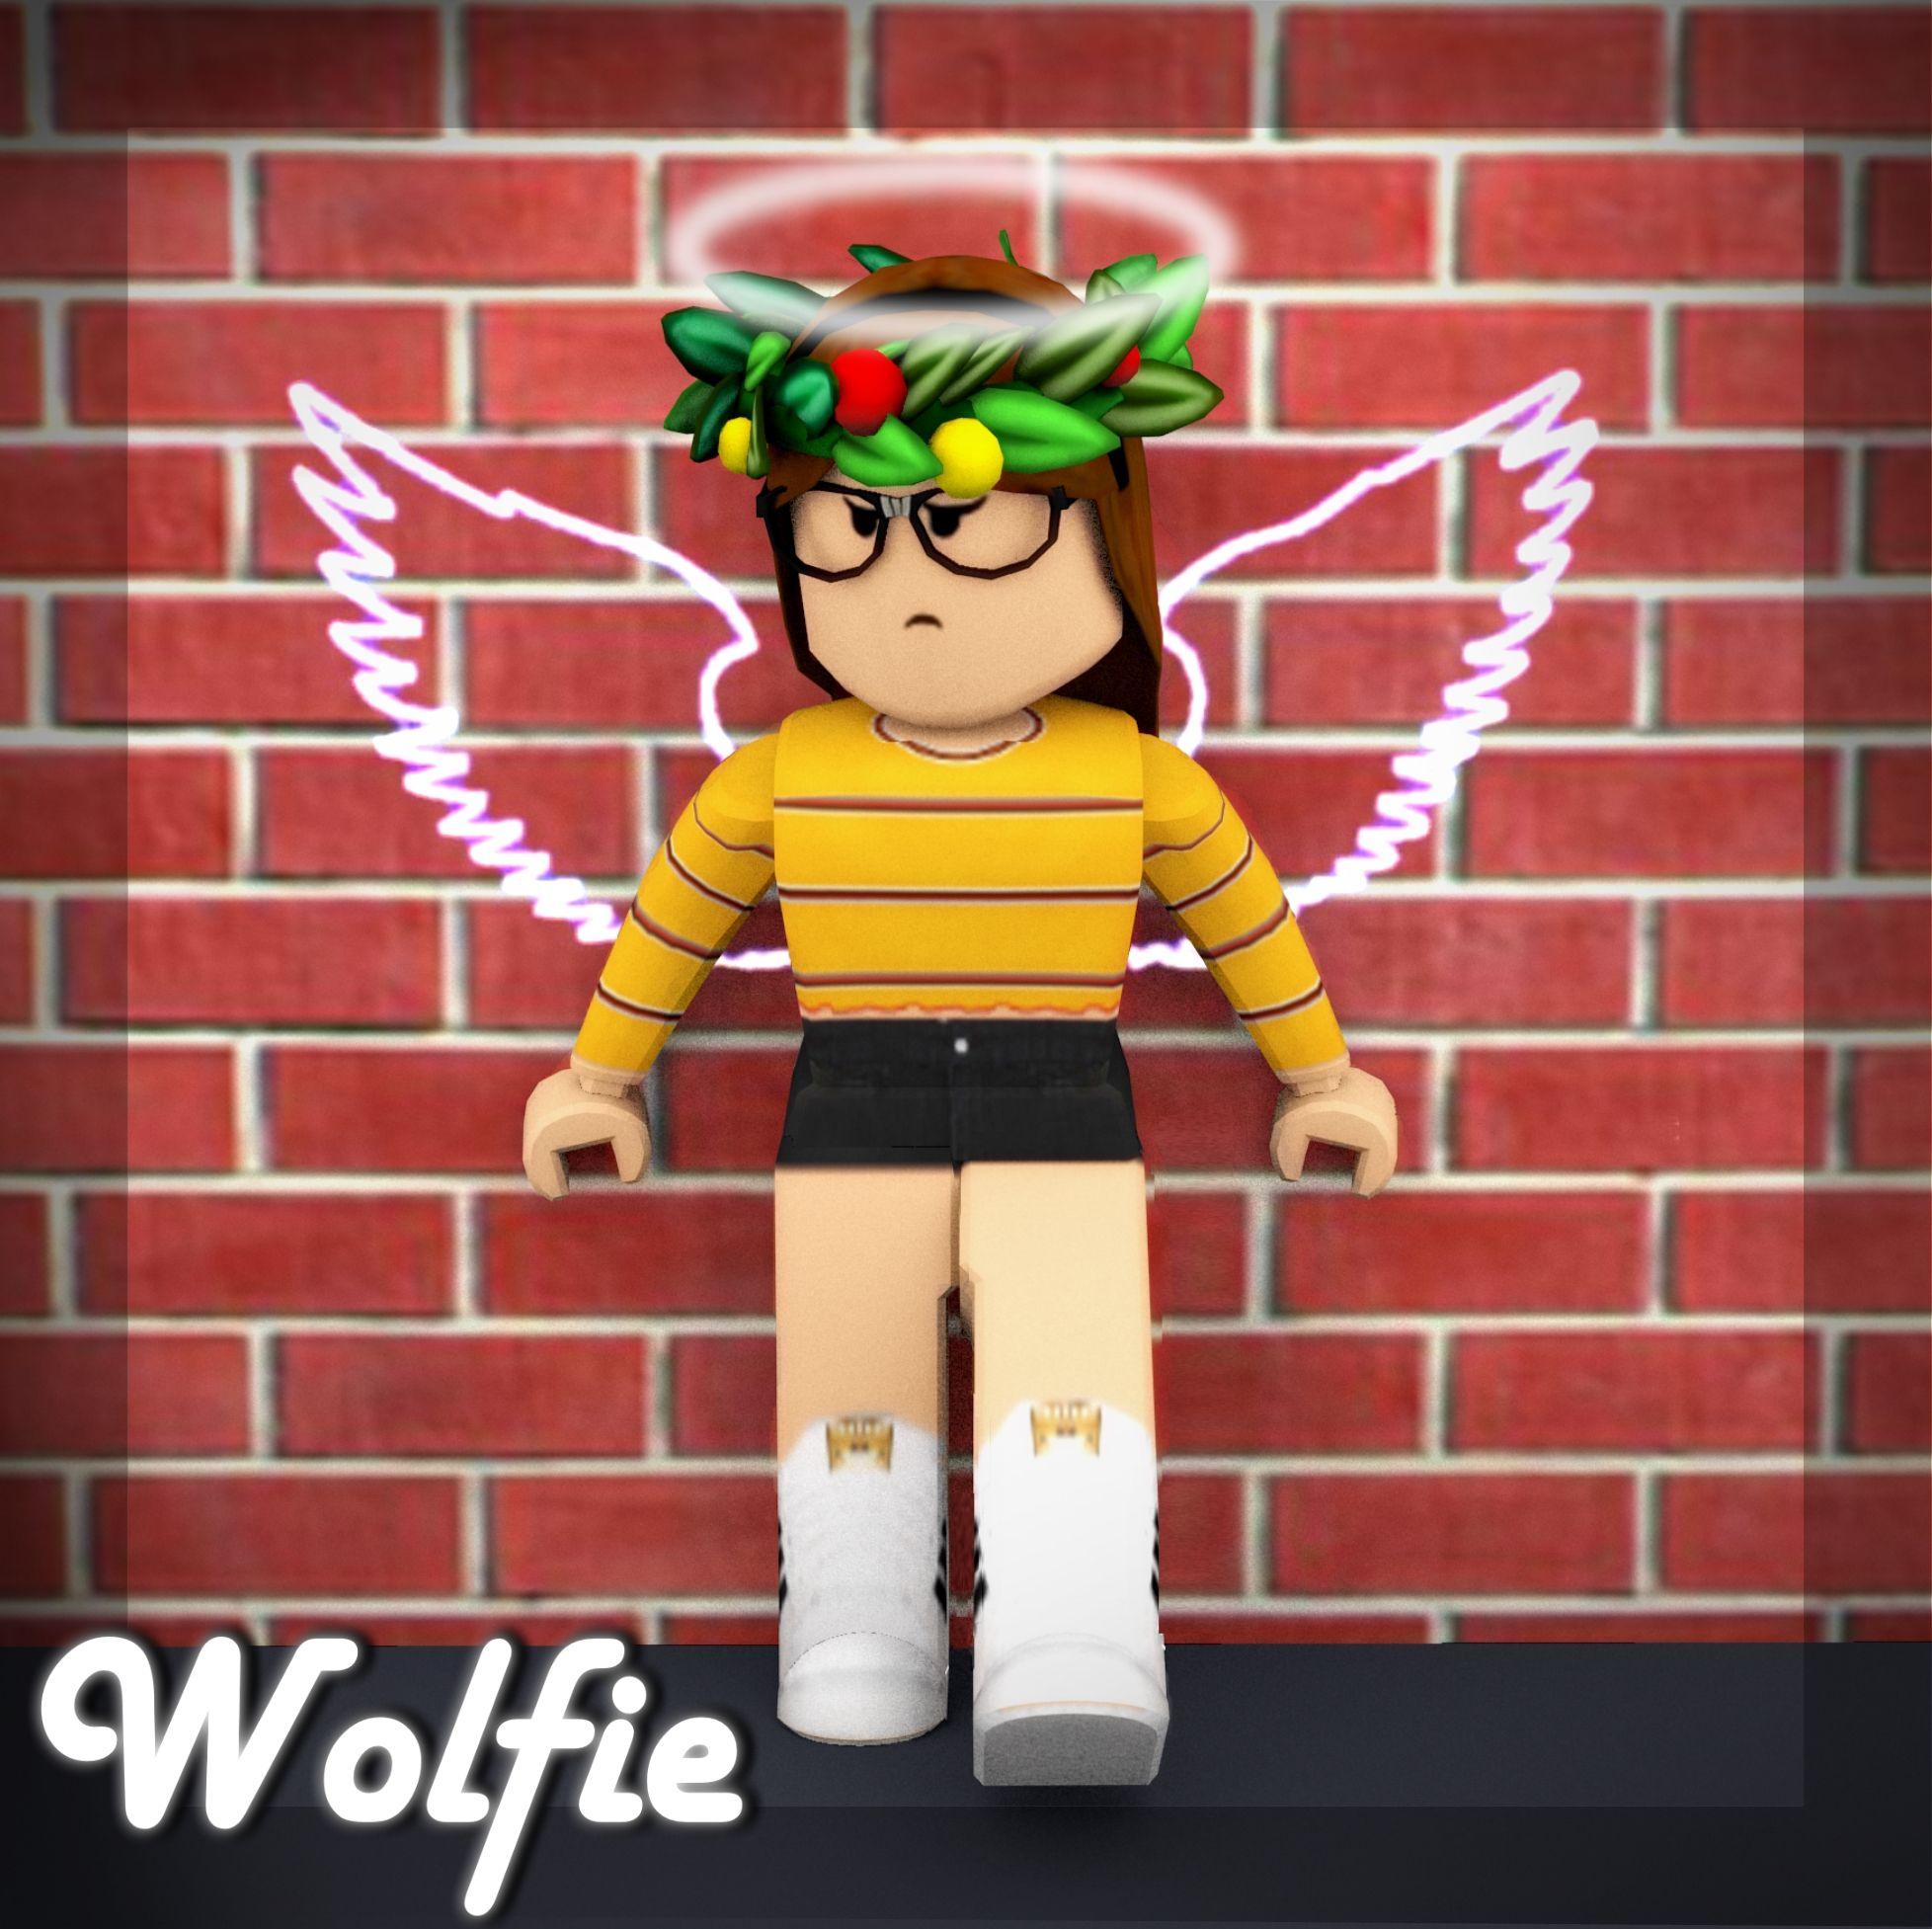 Roblox Cute Girls Wallpapers Wallpaper Cave More hd wallpapers of roblox will be added soon. roblox cute girls wallpapers